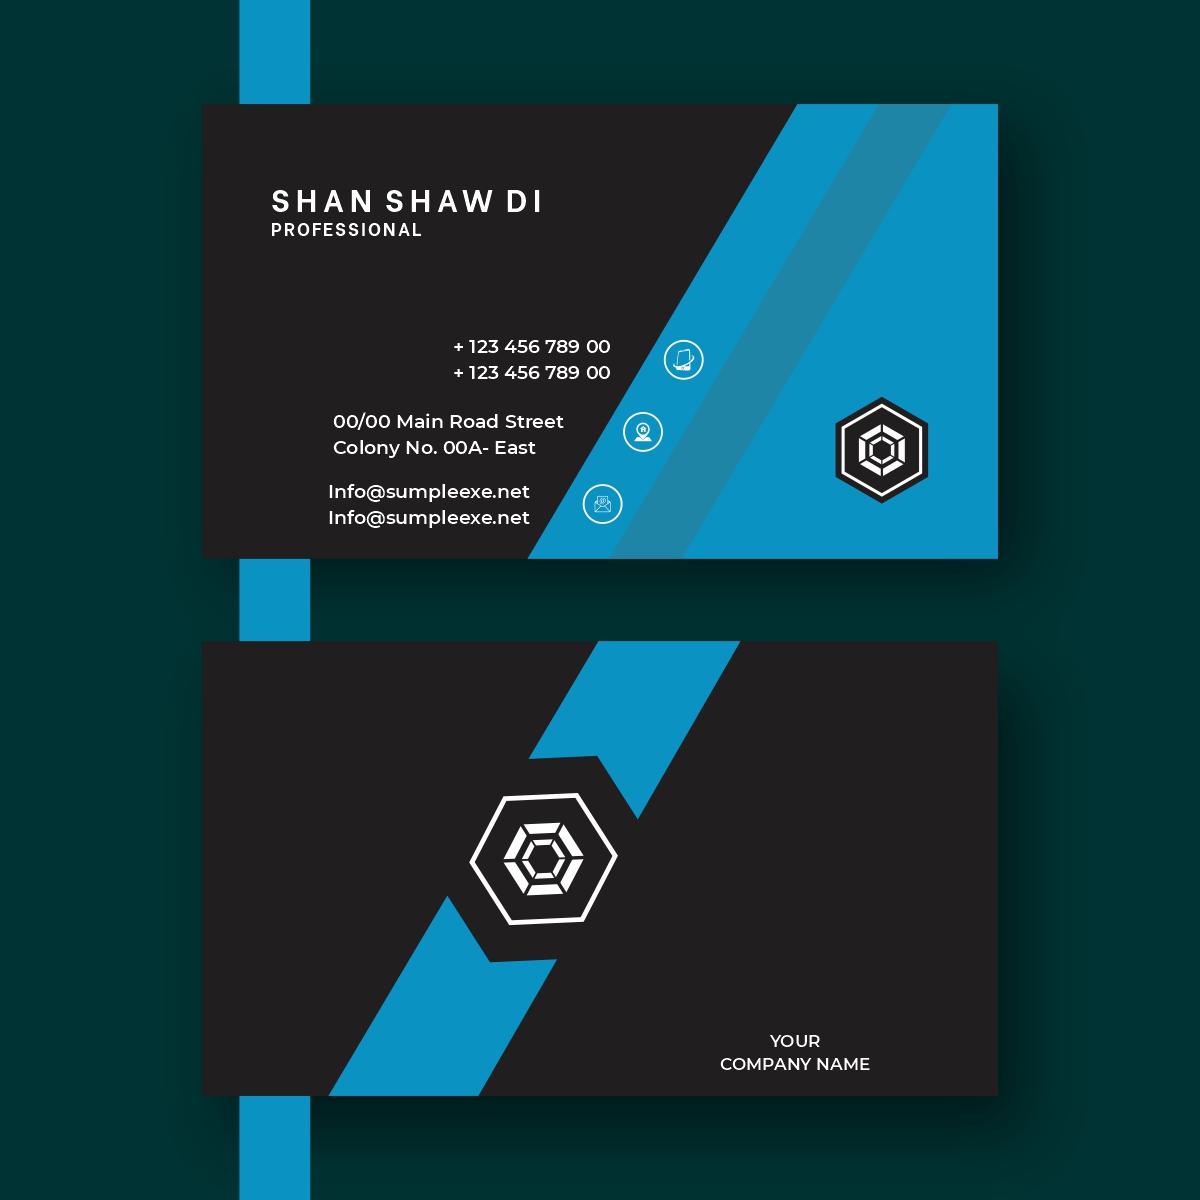 Abstract Black Business Card With Blue Shade Free Vector